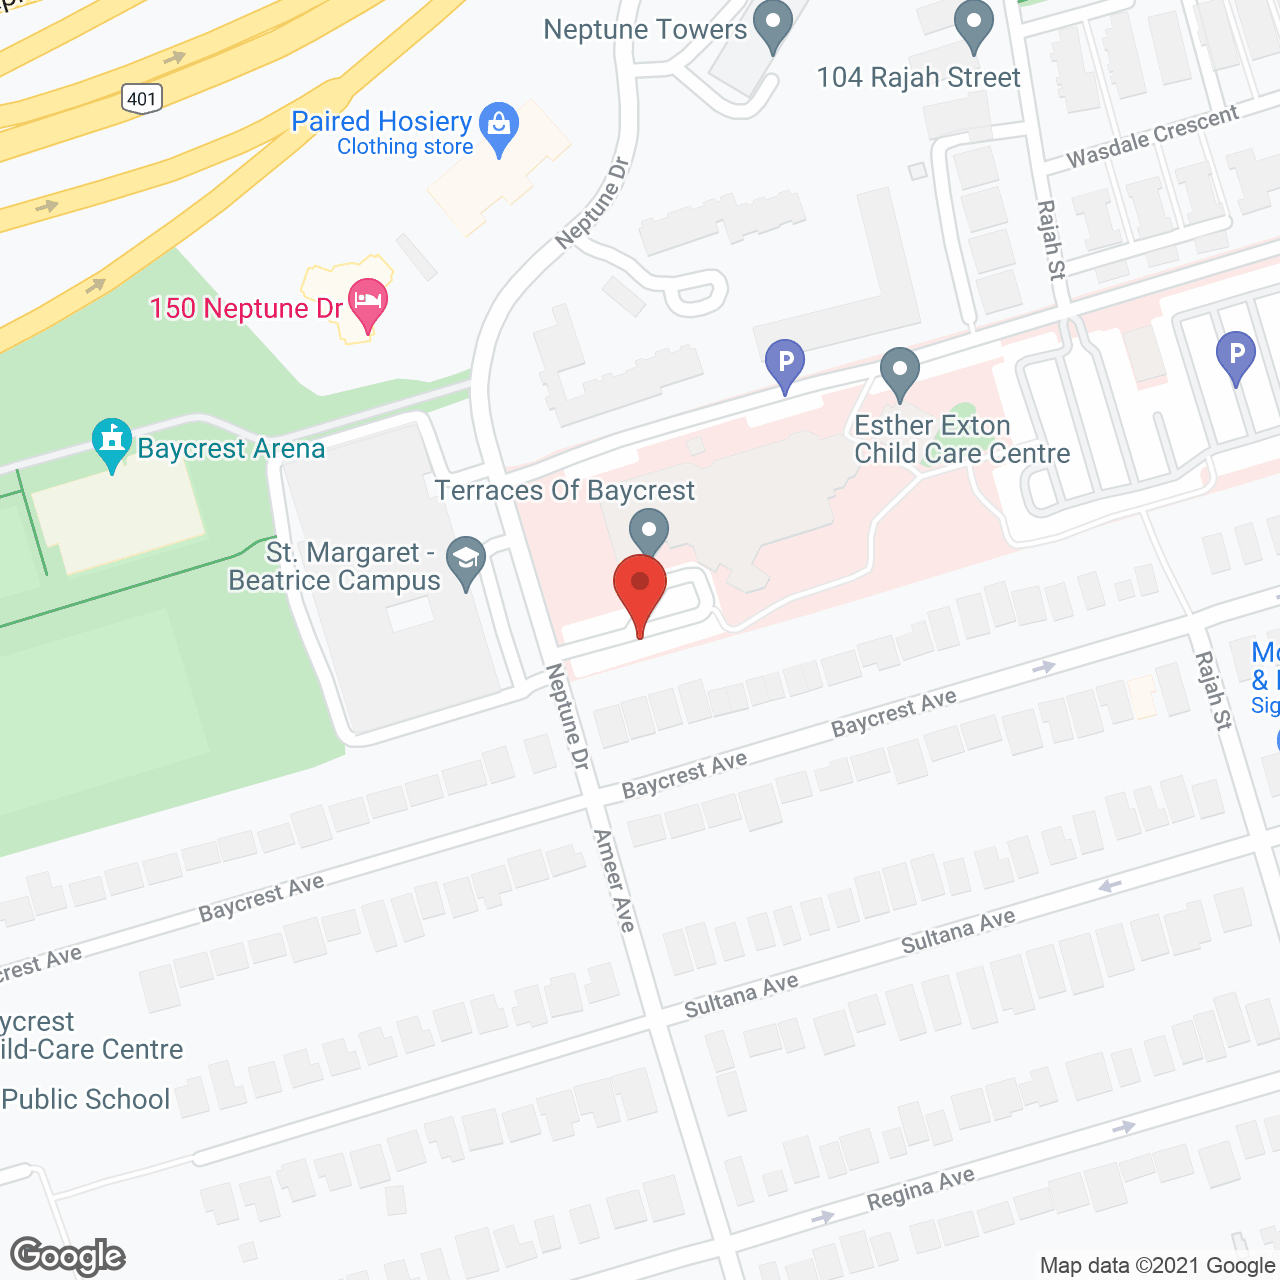 Terraces Of Baycrest in google map